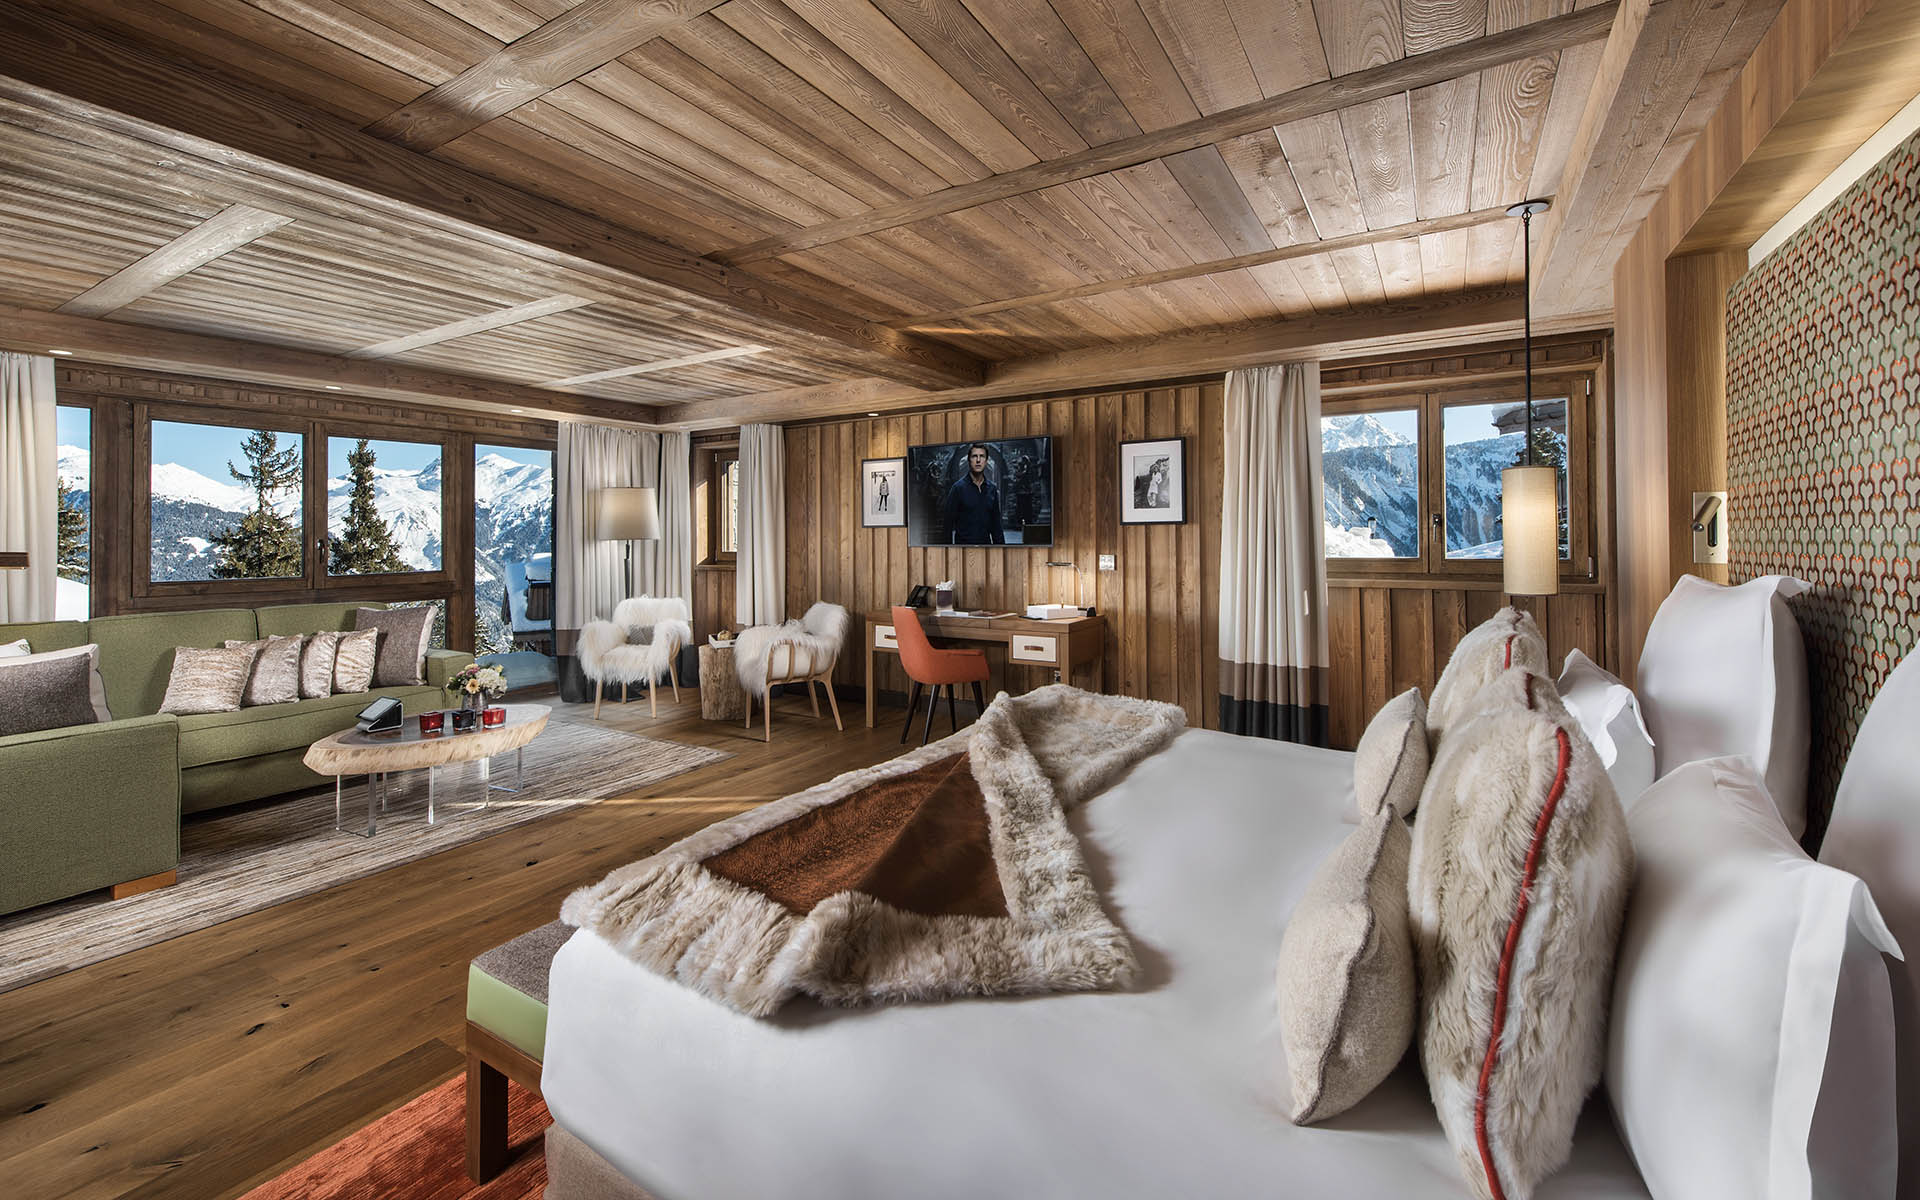 Hotel Barriere Les Neiges, Courchevel 1850